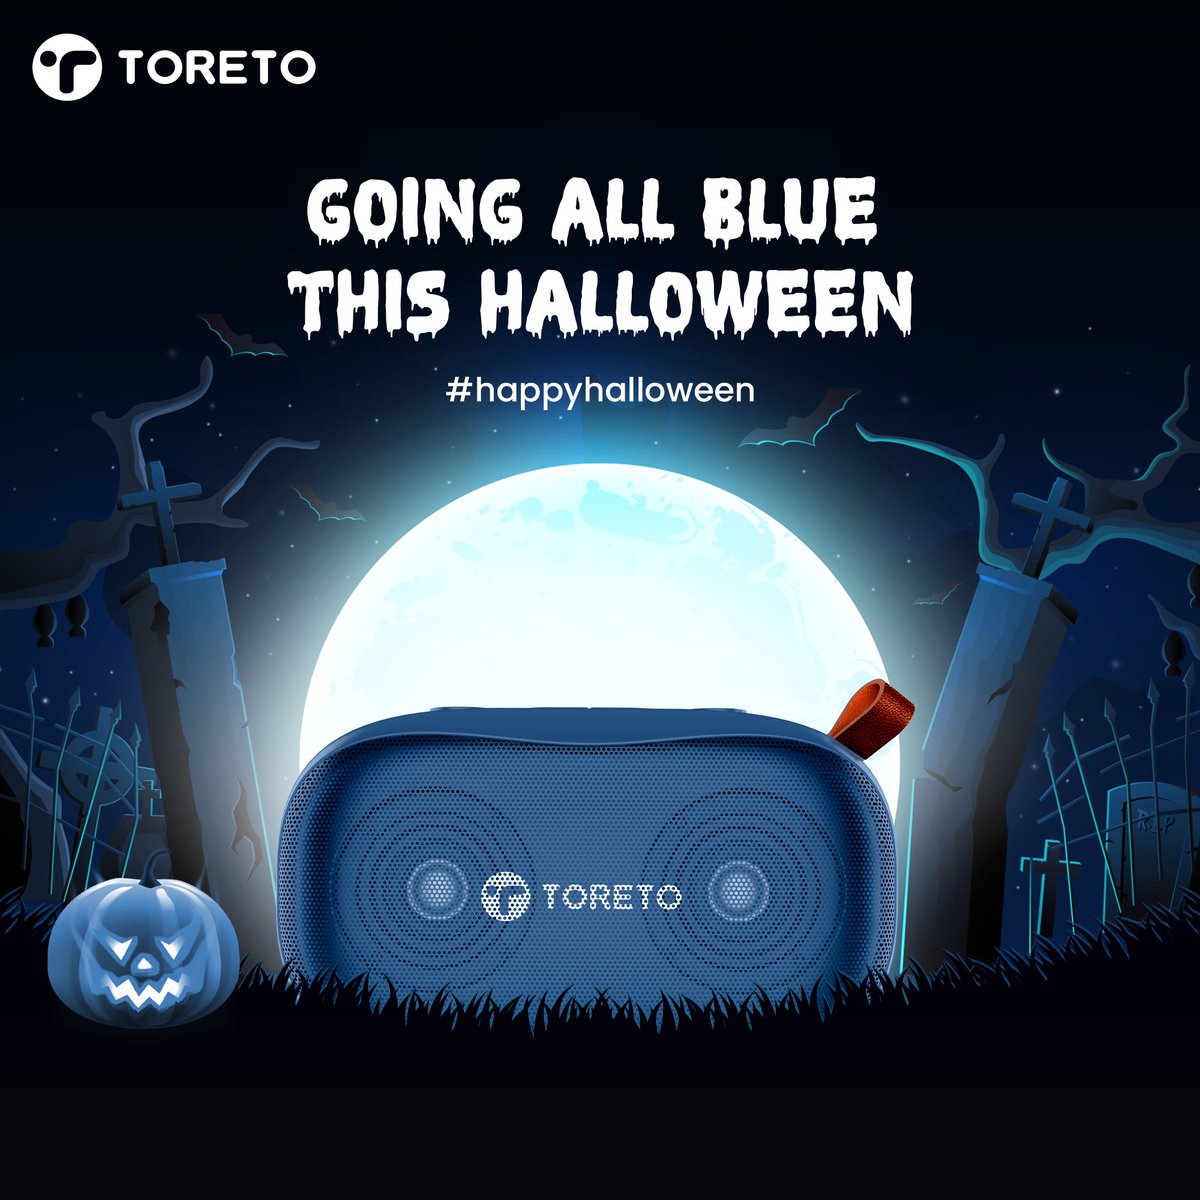 Sound that gives you chills in shades of blue!

#Toretoindia #Beyou #Bangpro #Speaker #Explorepage #Explore #Trending #Halloween #Happyhalloween #Halloween2023